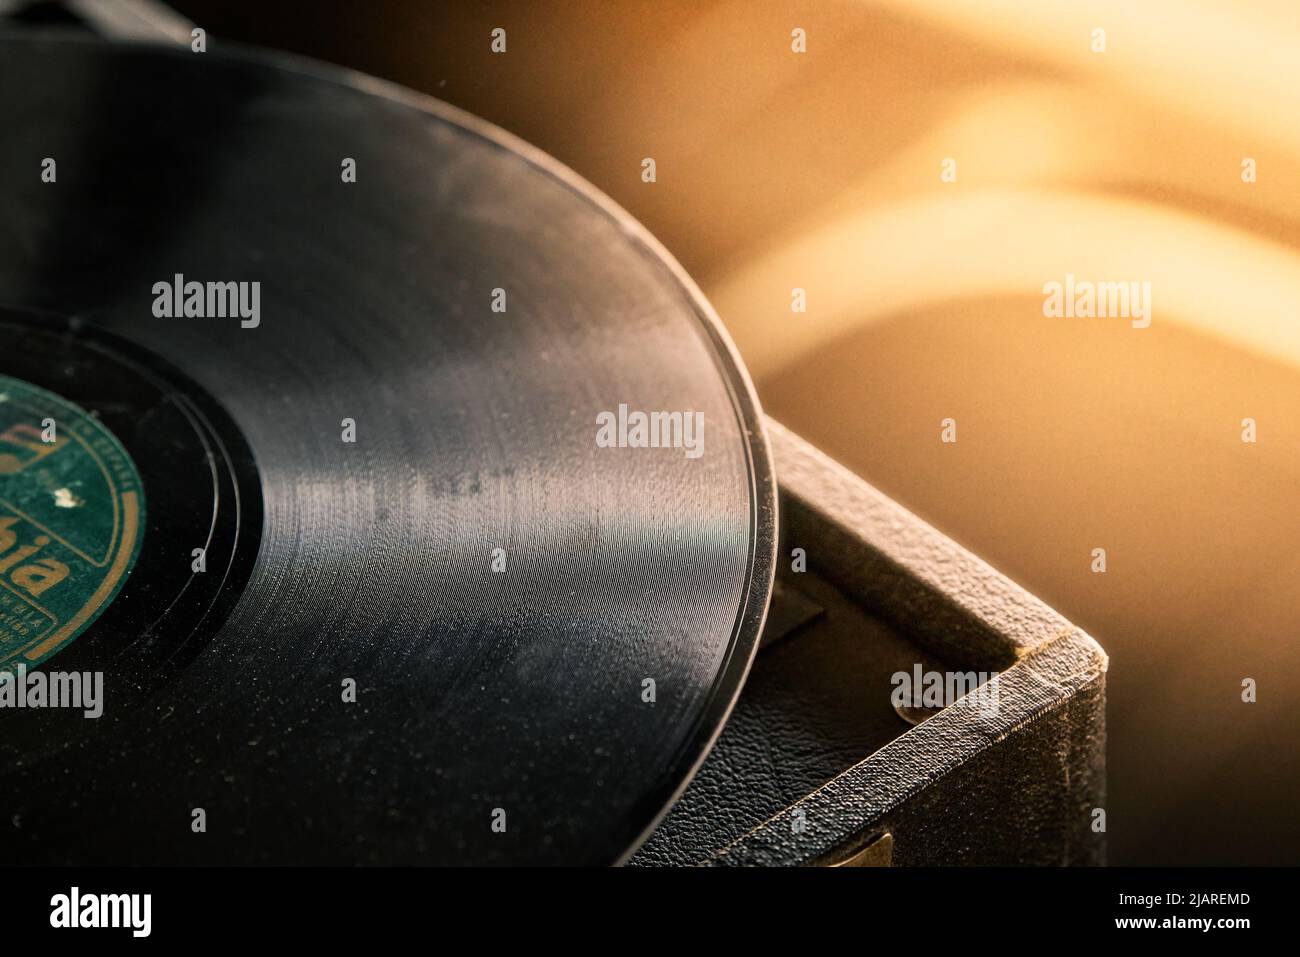 old vinyl record covered in dust Stock Photo